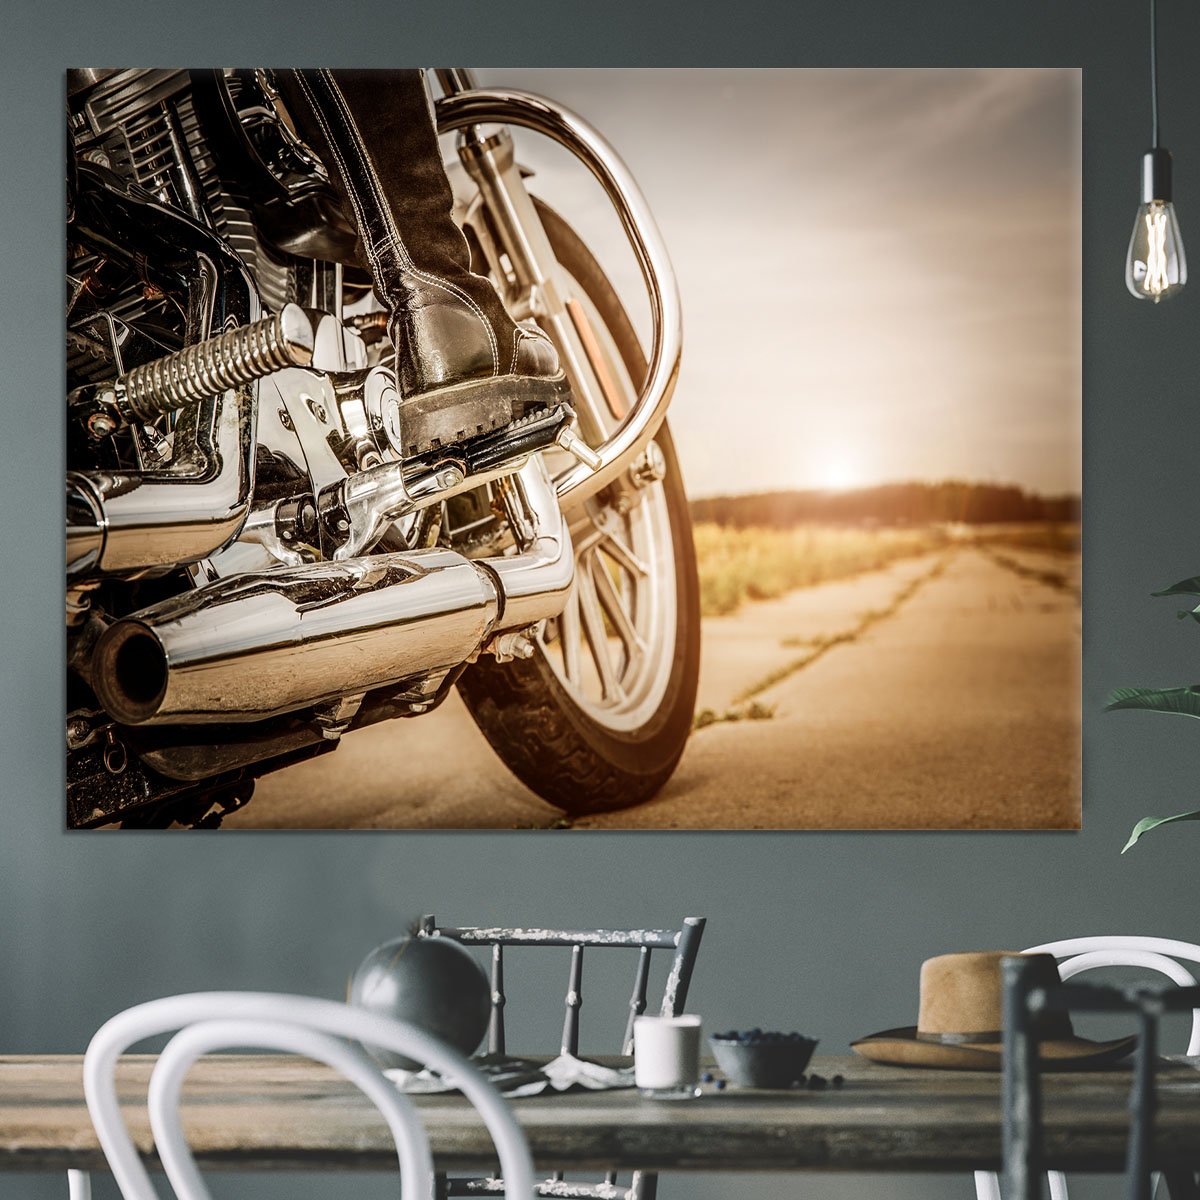 Motorbike Close Up Canvas Print or Poster